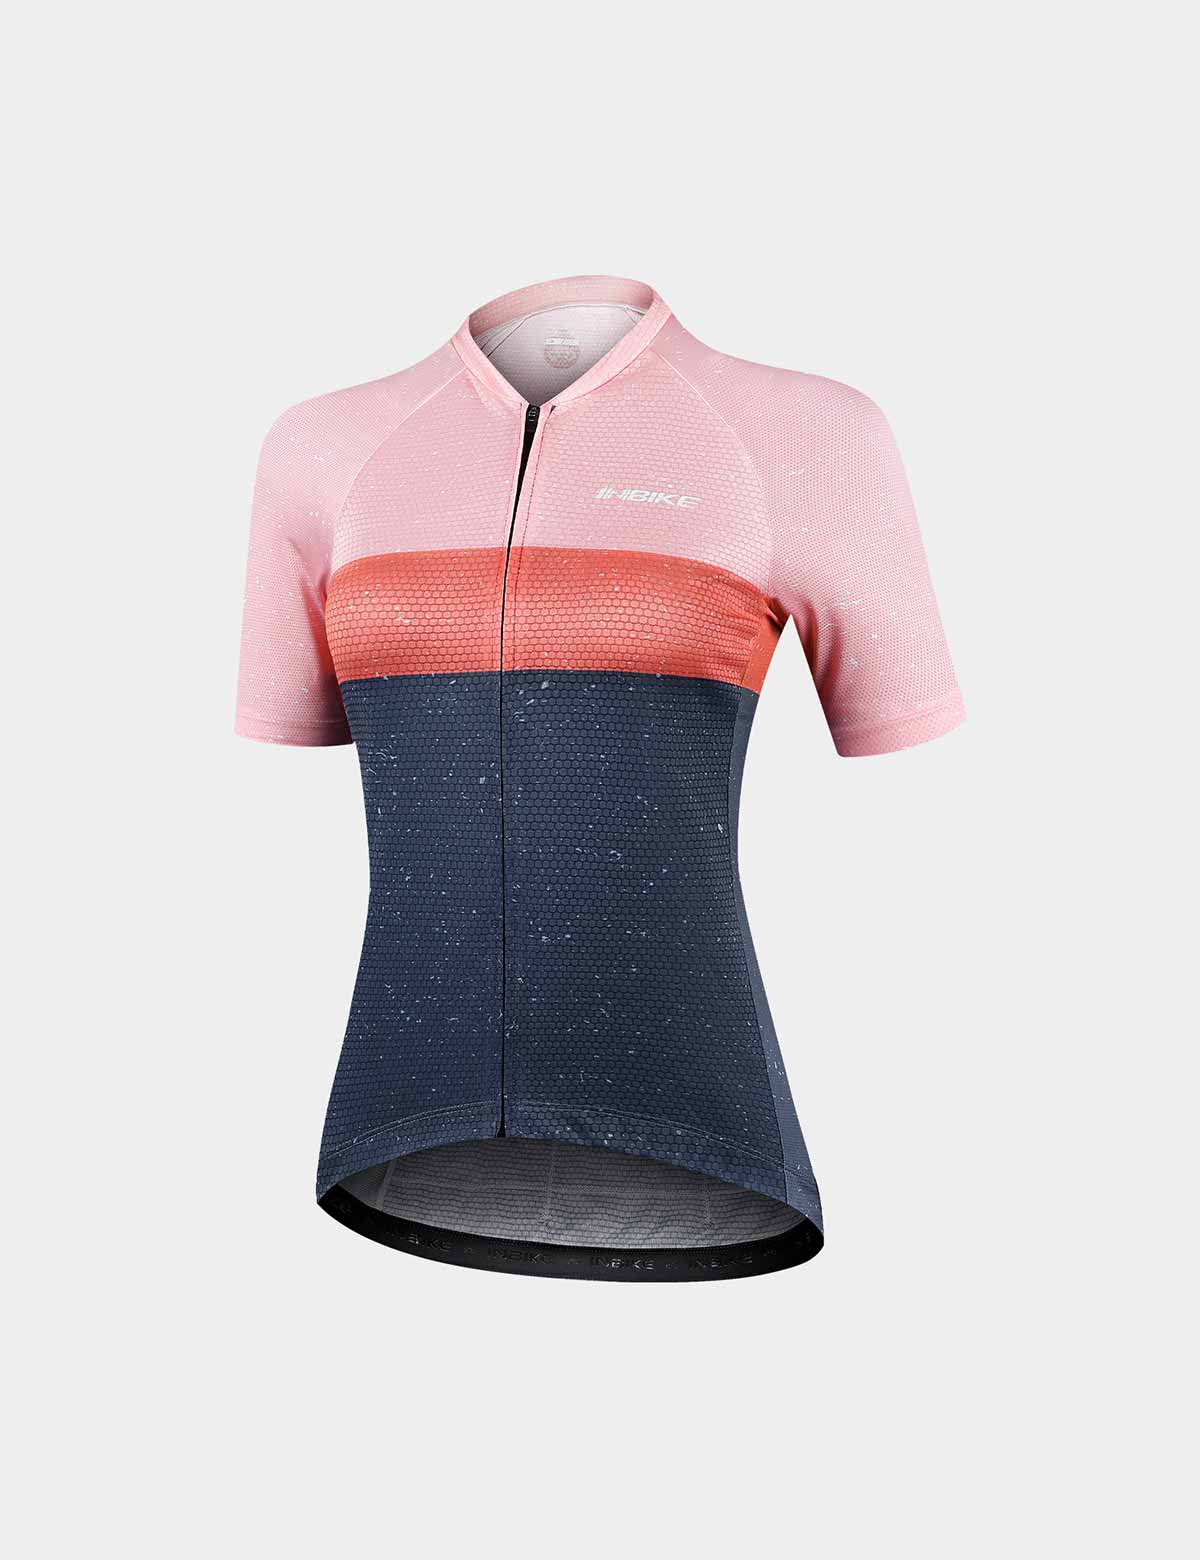 Details about   Women Cycling Short Sleeve Jersey Team Cycling Jersey Bicycle Shirt MTB Tops H29 